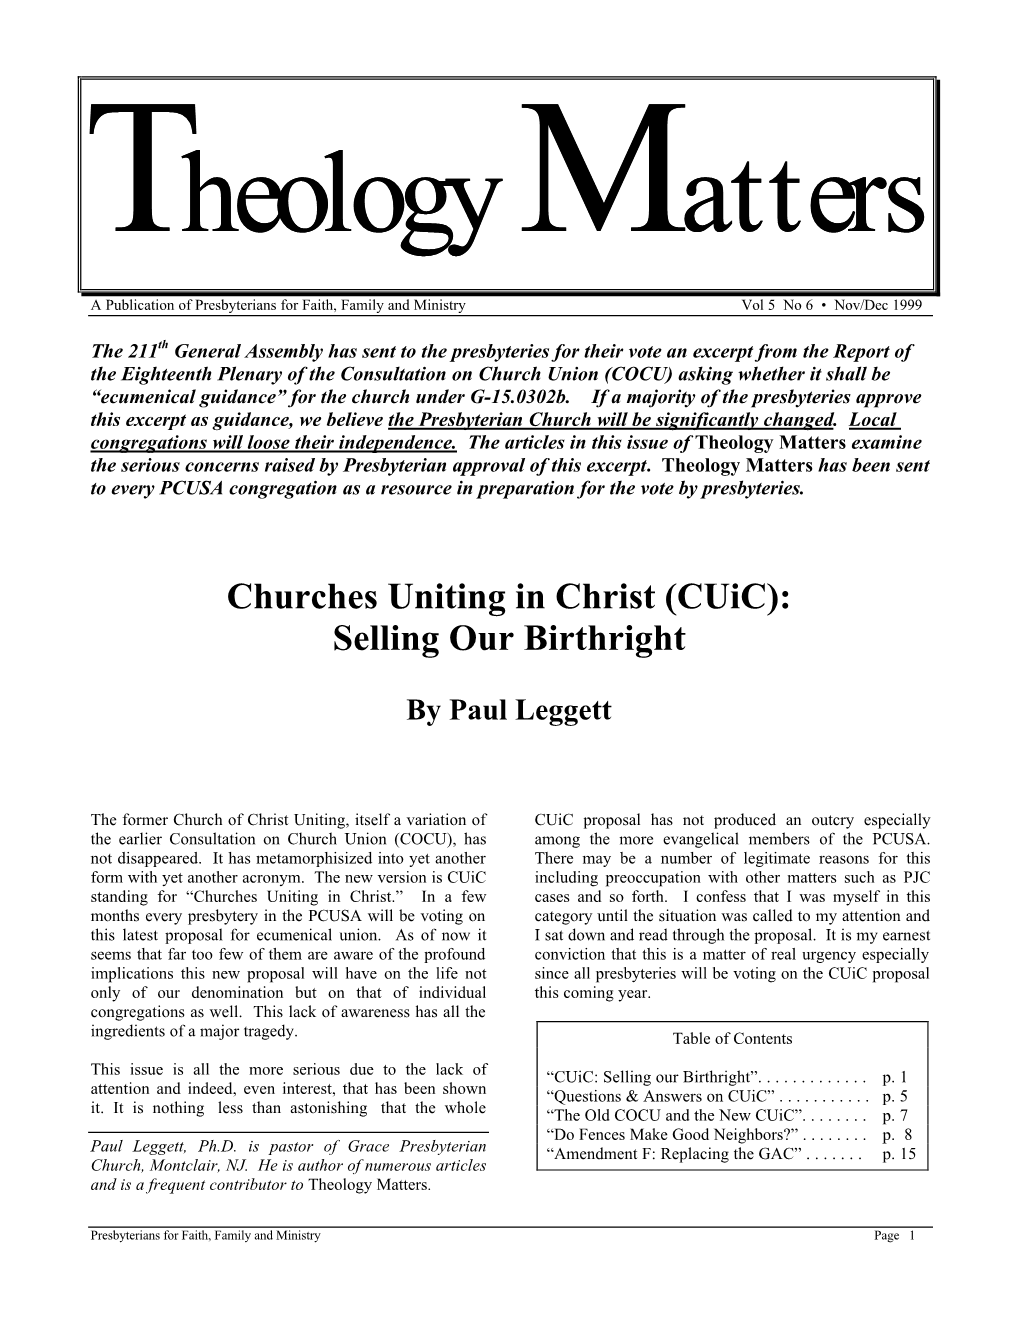 Churches Uniting in Christ (Cuic): Selling Our Birthright